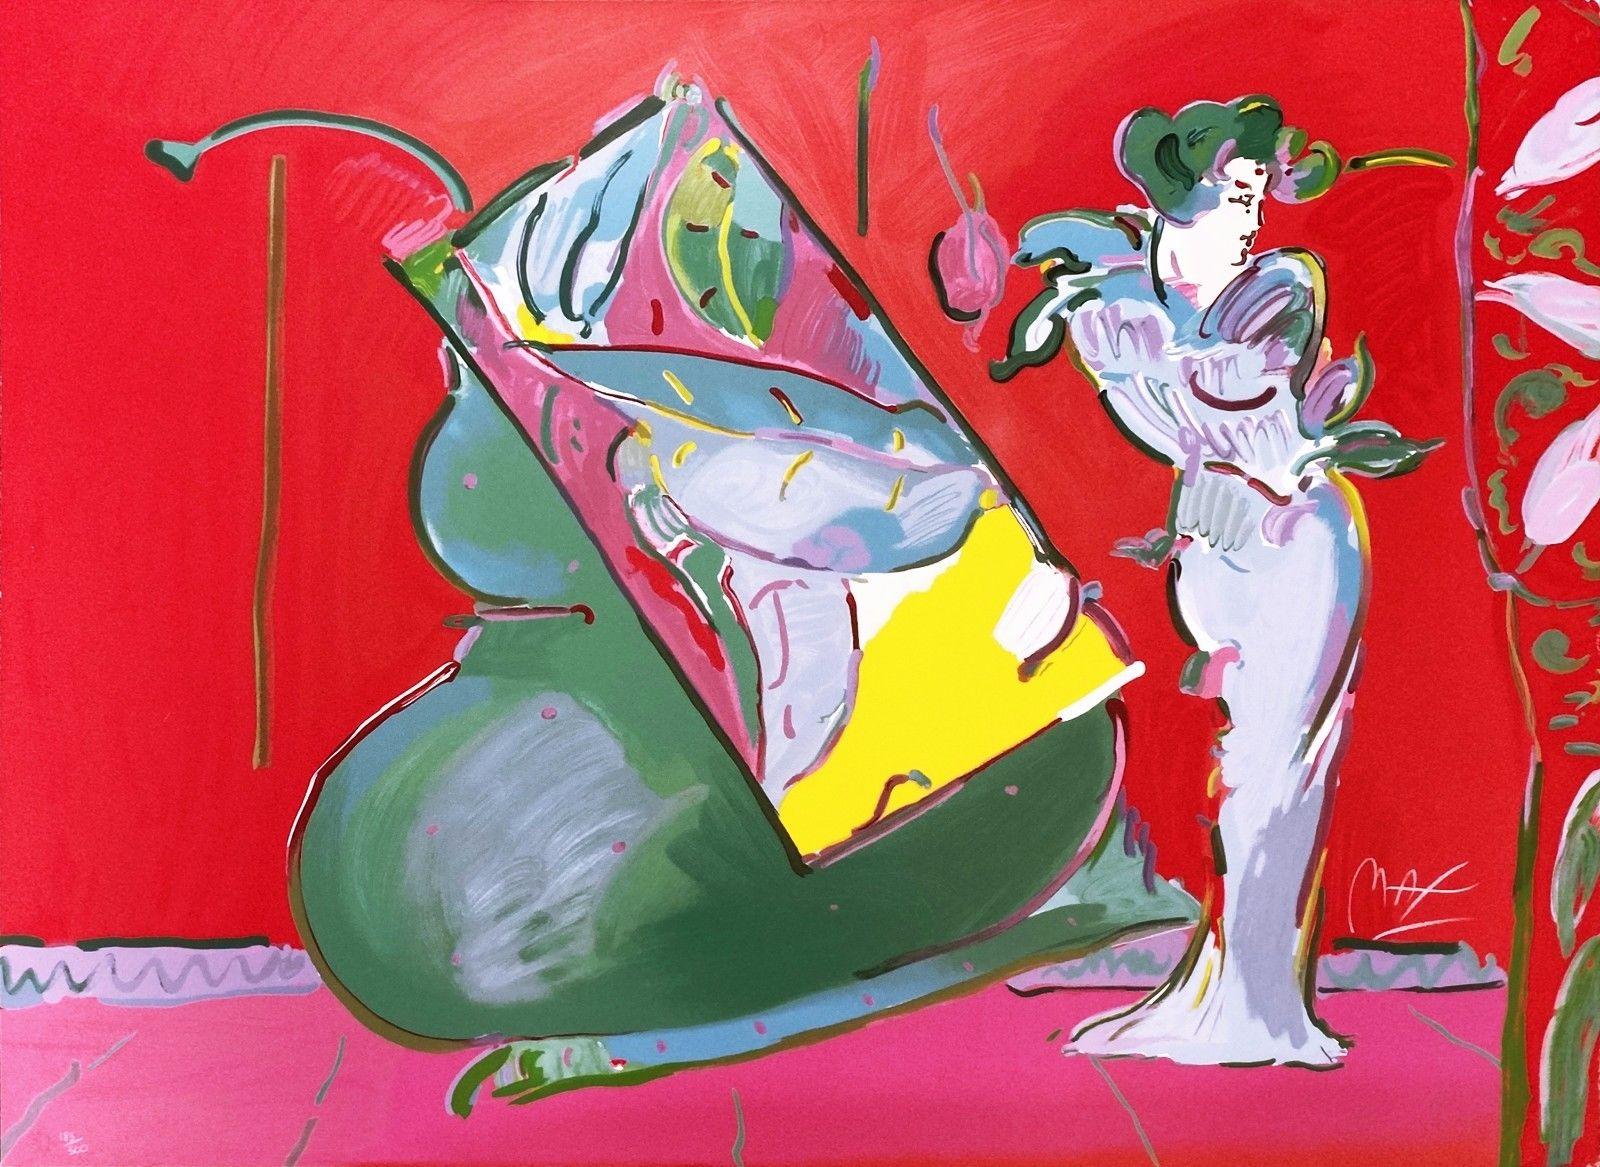 Figurative Print Peter Max - LADY ON RED WITH FLOATING VASE (Rouge sur le devant)